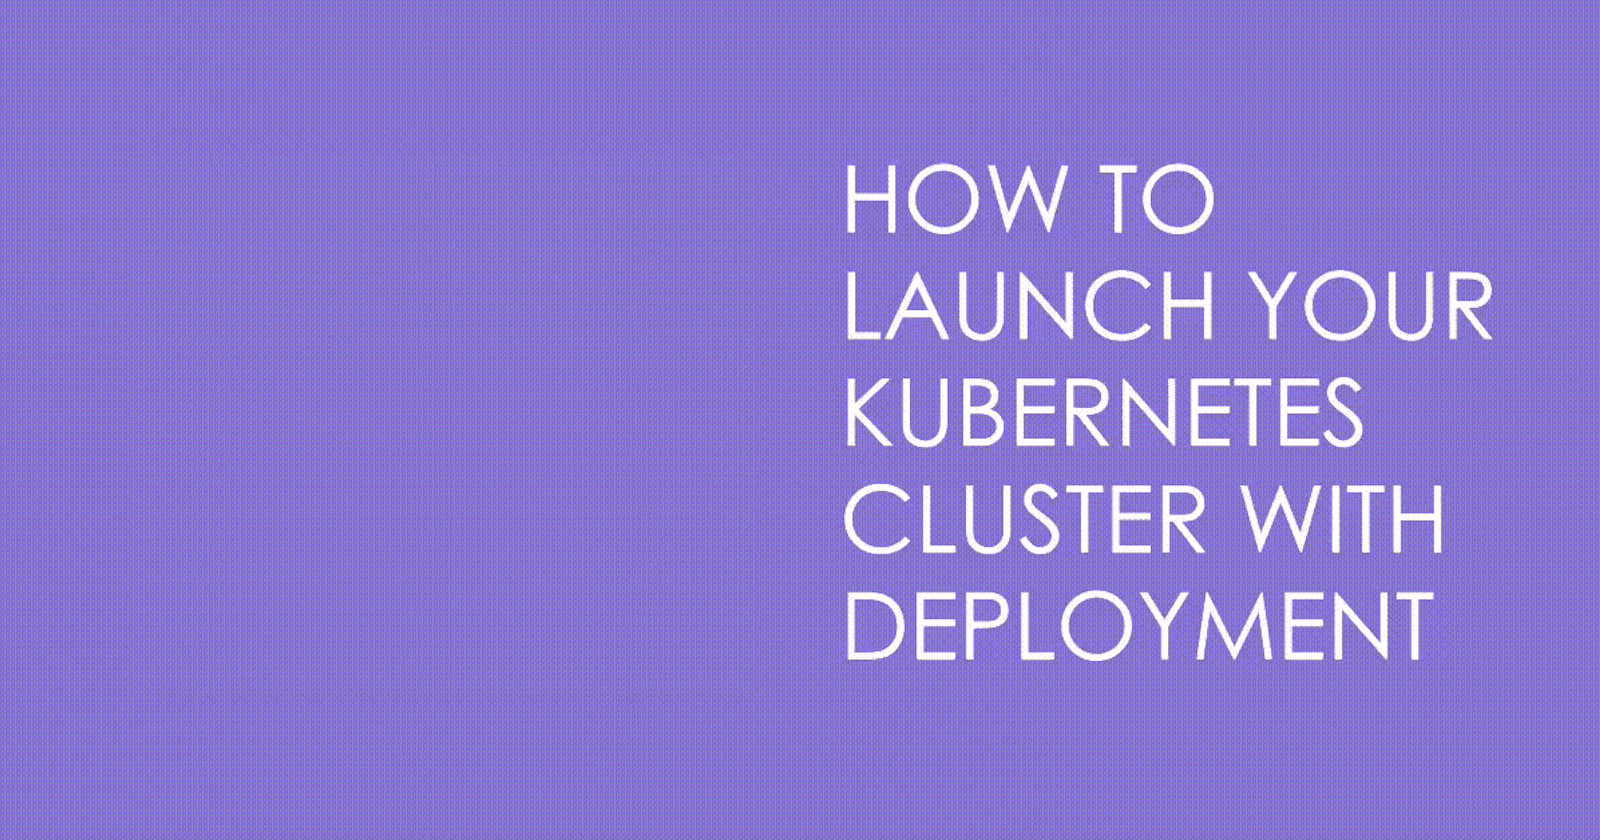 Launching Your Kubernetes Cluster with Deployment | Day 32 of 90 Days of DevOps